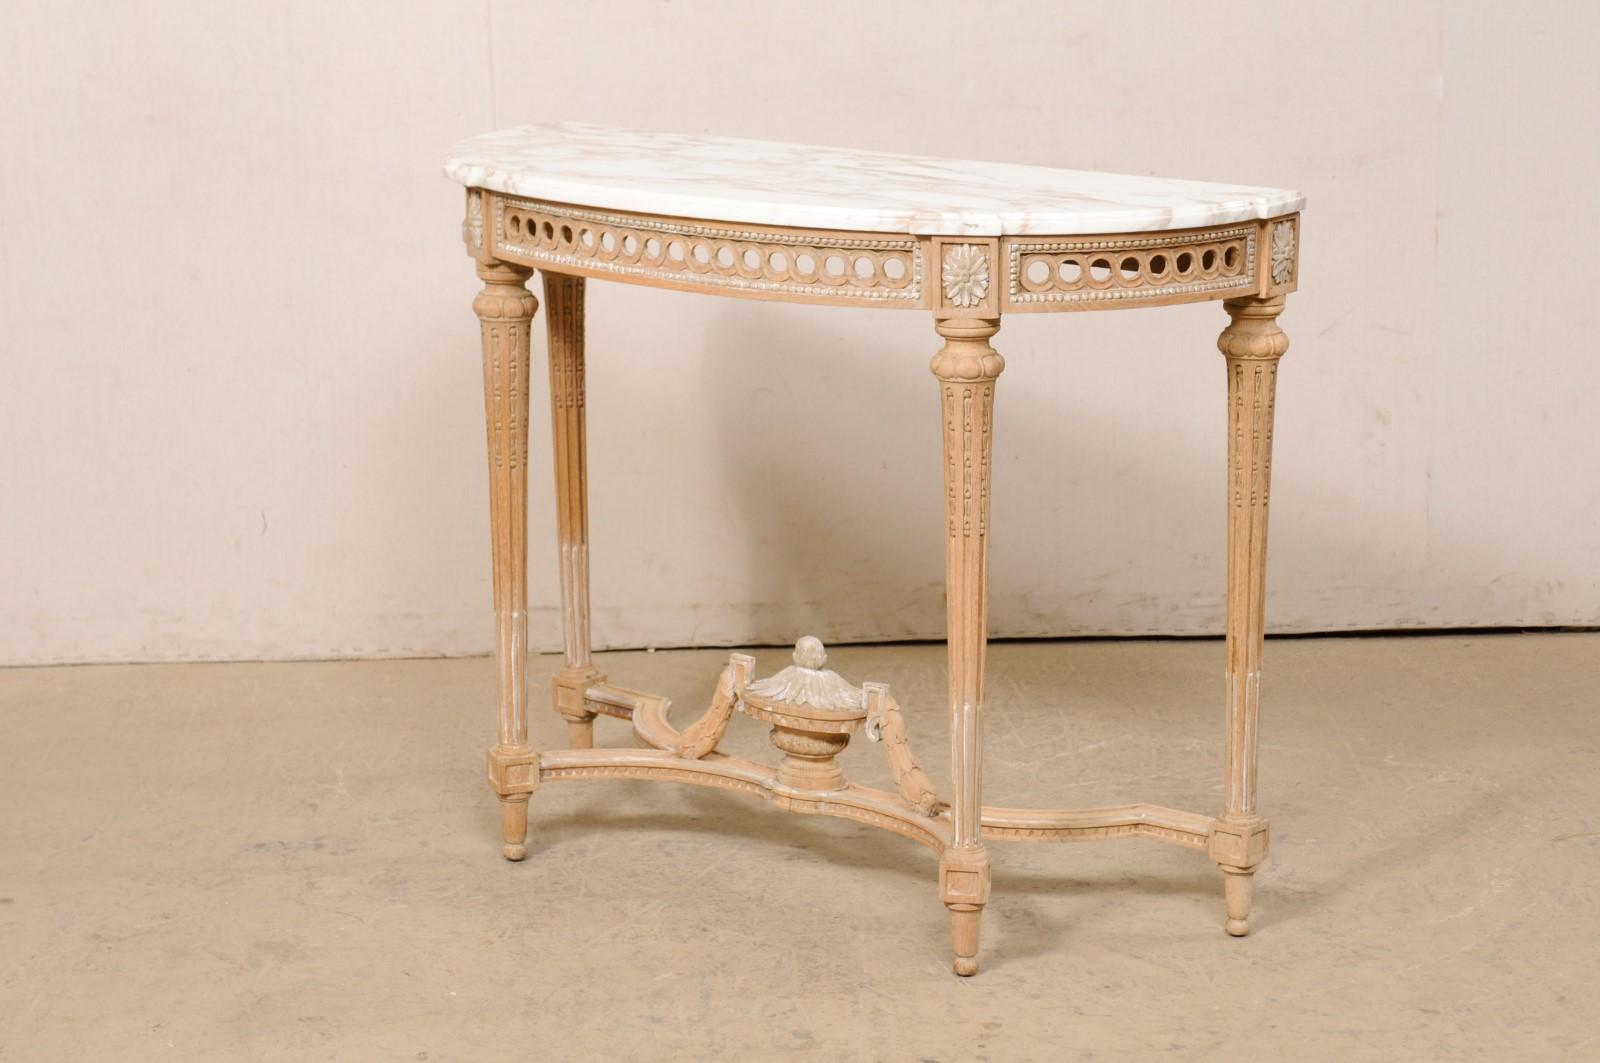 French Neoclassic Style Marble-Top Console Table W/Nice Urn Finial at Underside For Sale 6